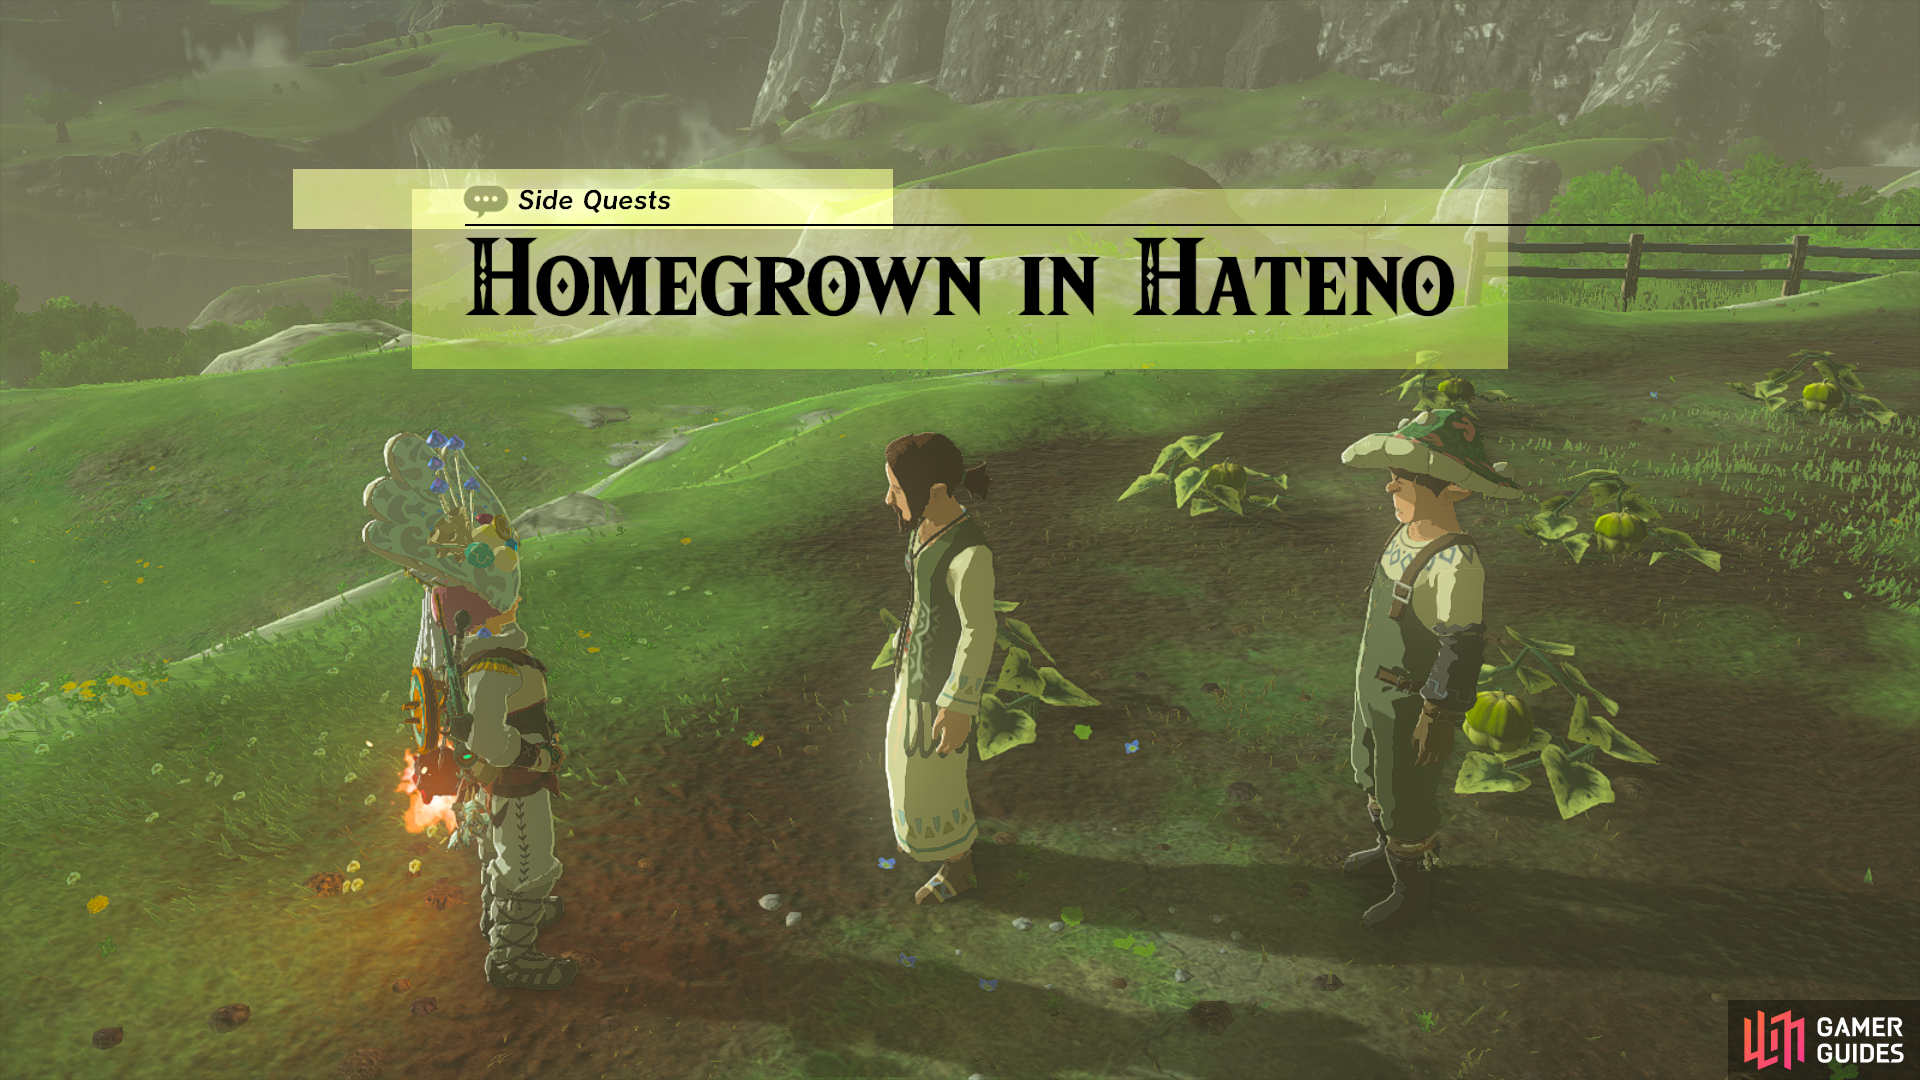 Starting Homegrown in Hateno.